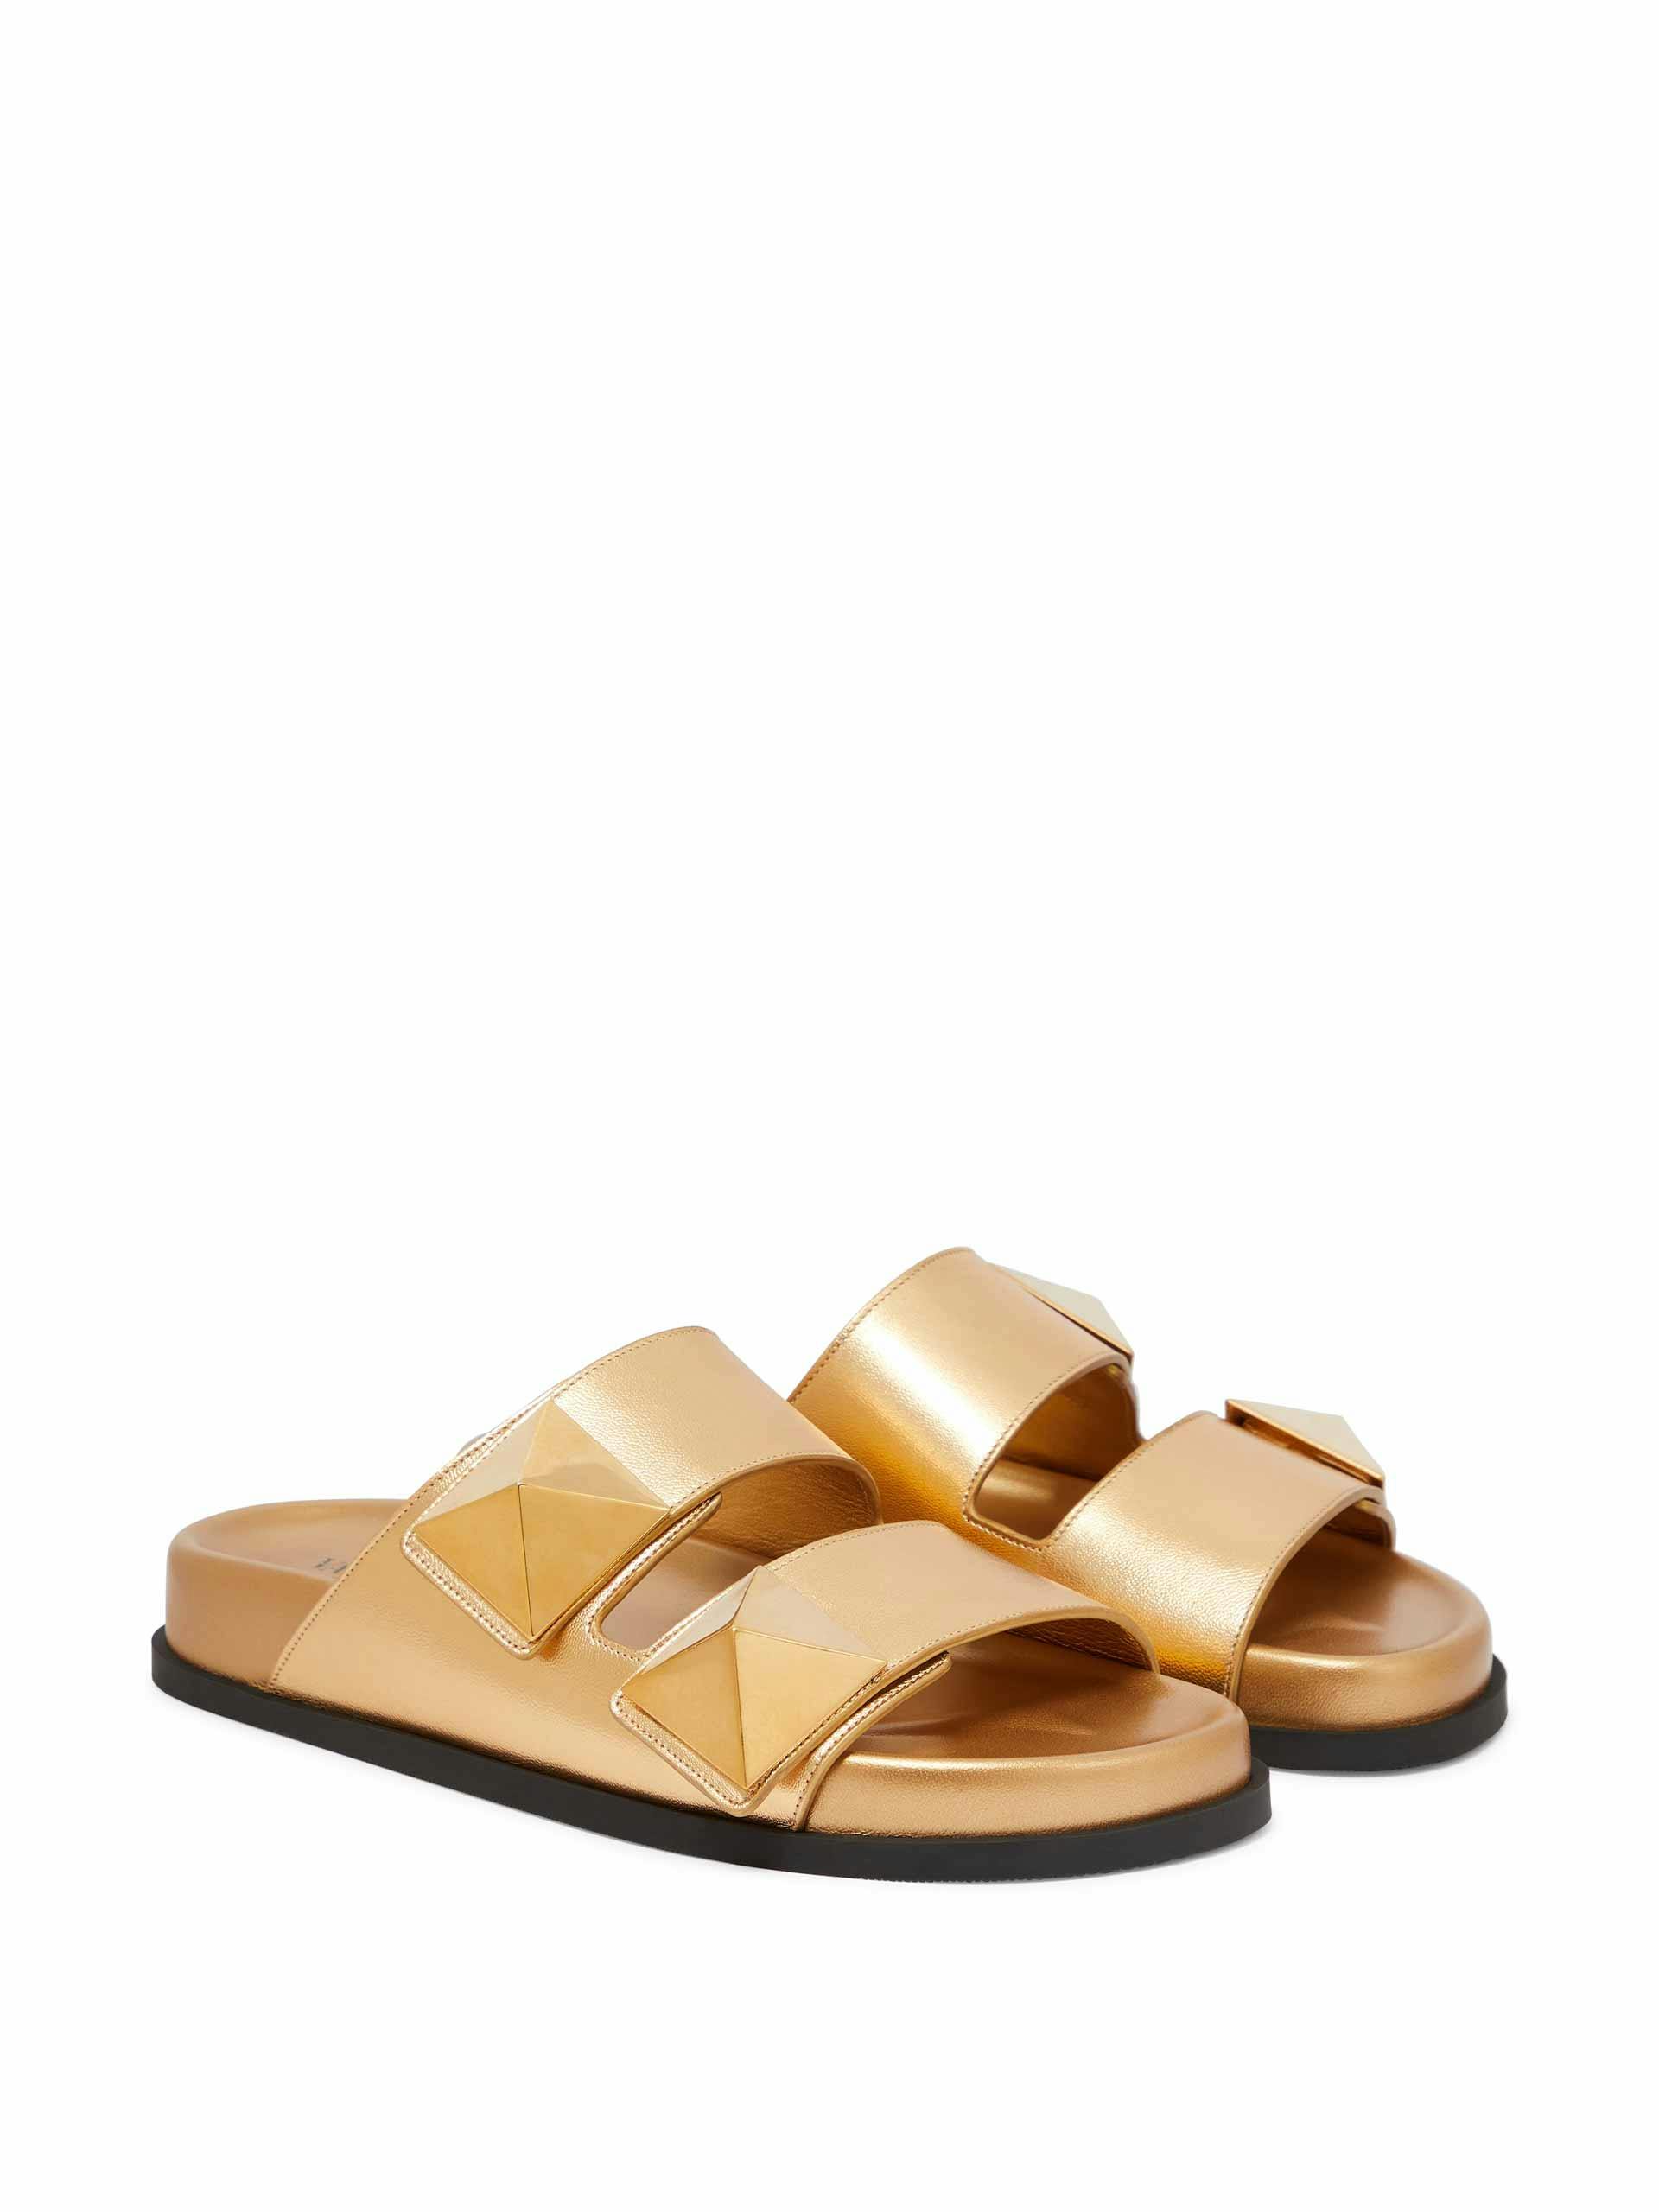 Gold leather studded sandals